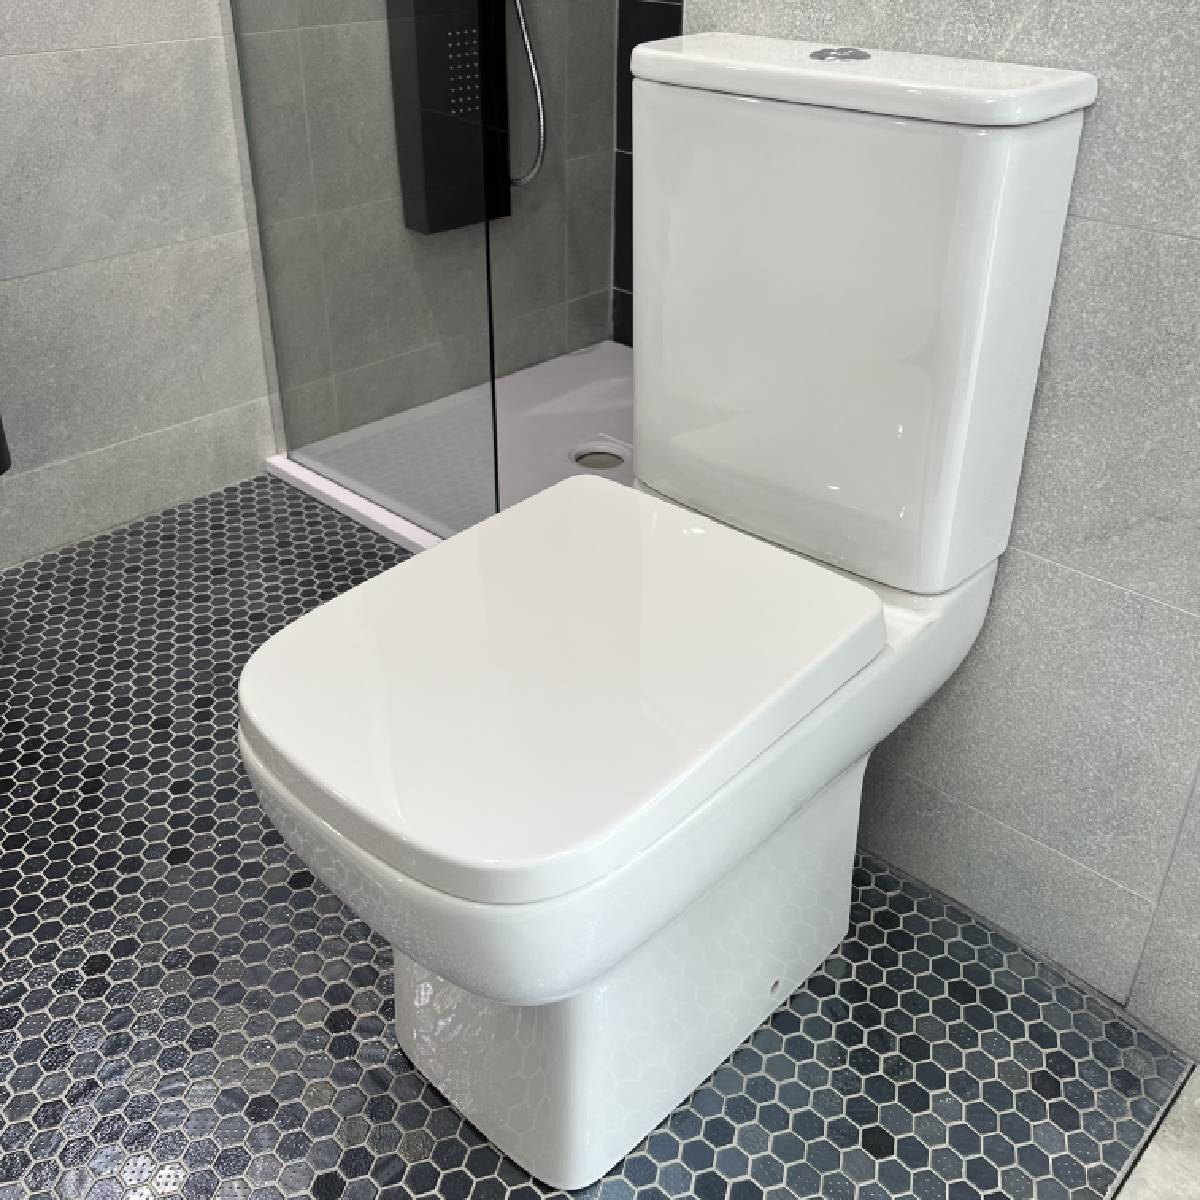 Aida Rimless Close Coupled Toilet with Clip off Soft Close Toilet Seat (15738)